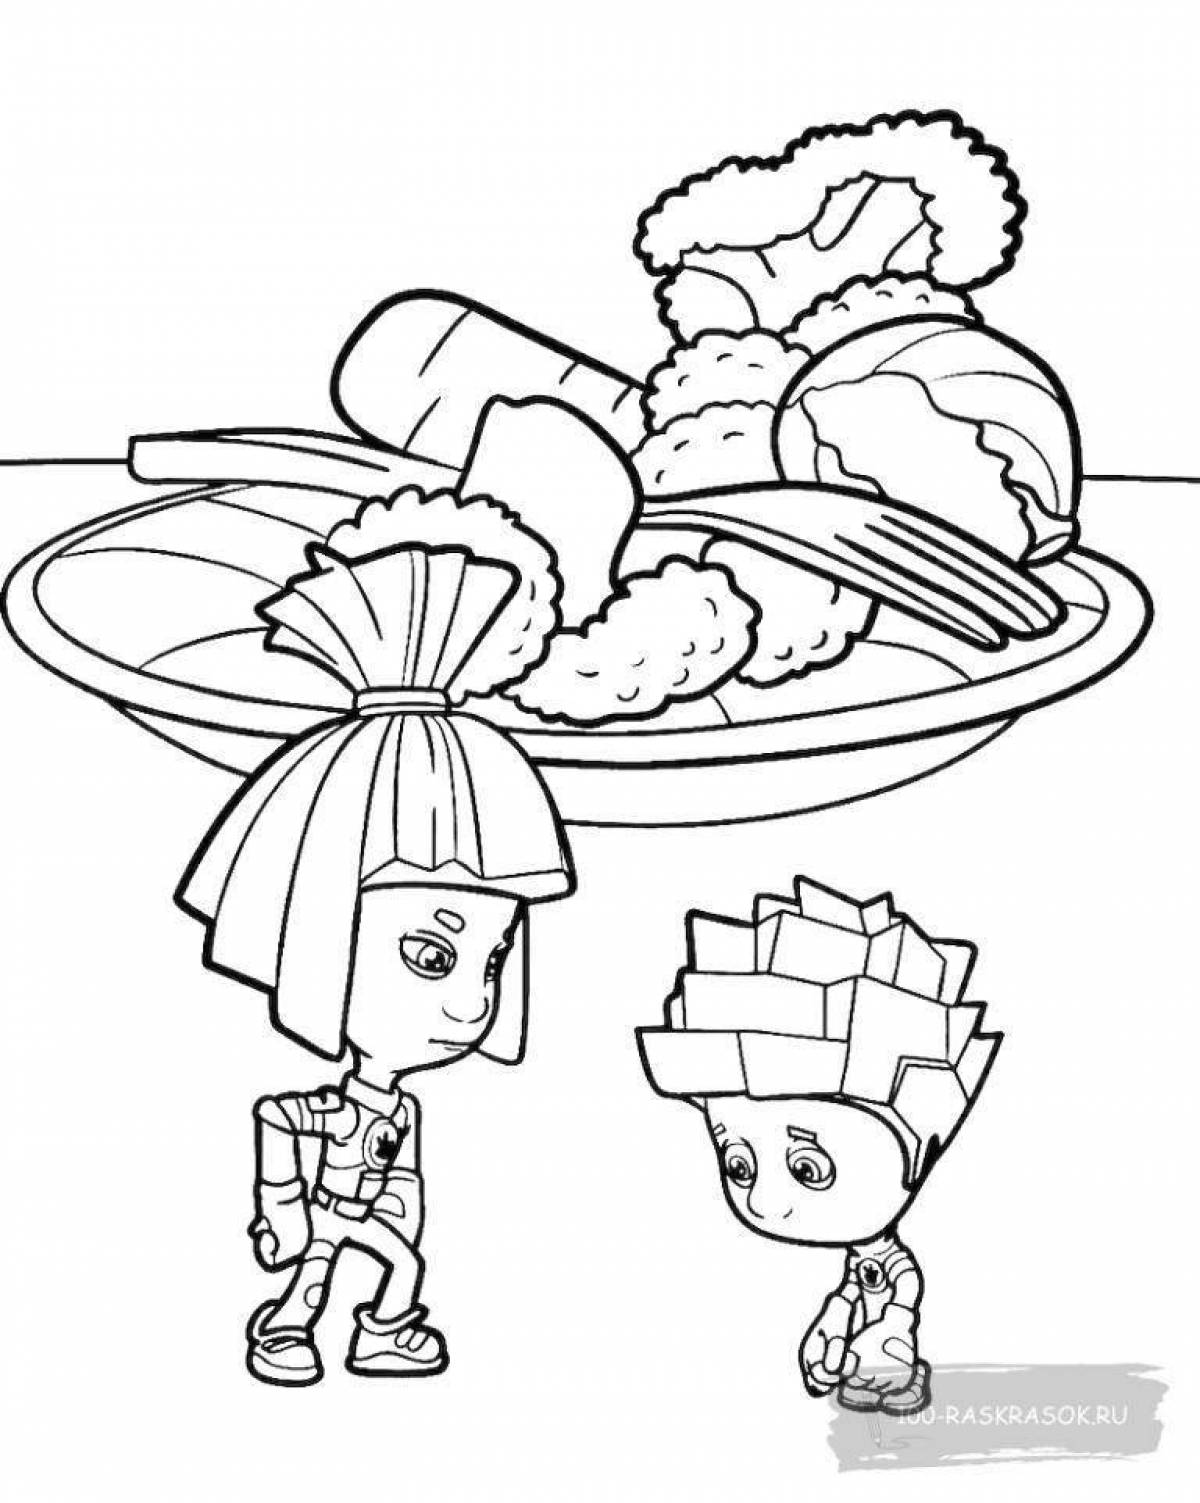 Fascinating Fixies Coloring Pages for Toddlers